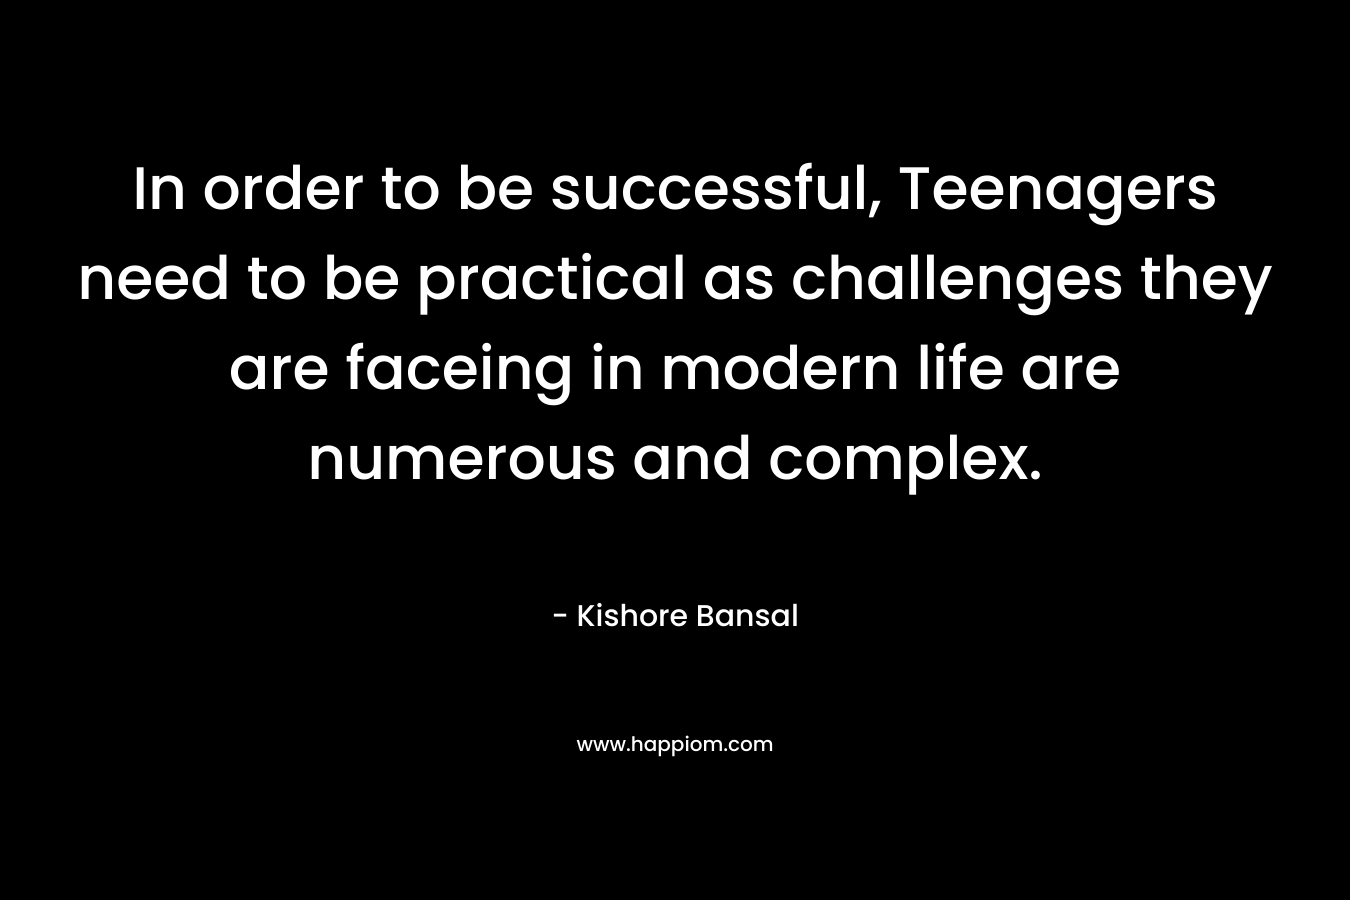 In order to be successful, Teenagers need to be practical as challenges they are faceing in modern life are numerous and complex. – Kishore Bansal